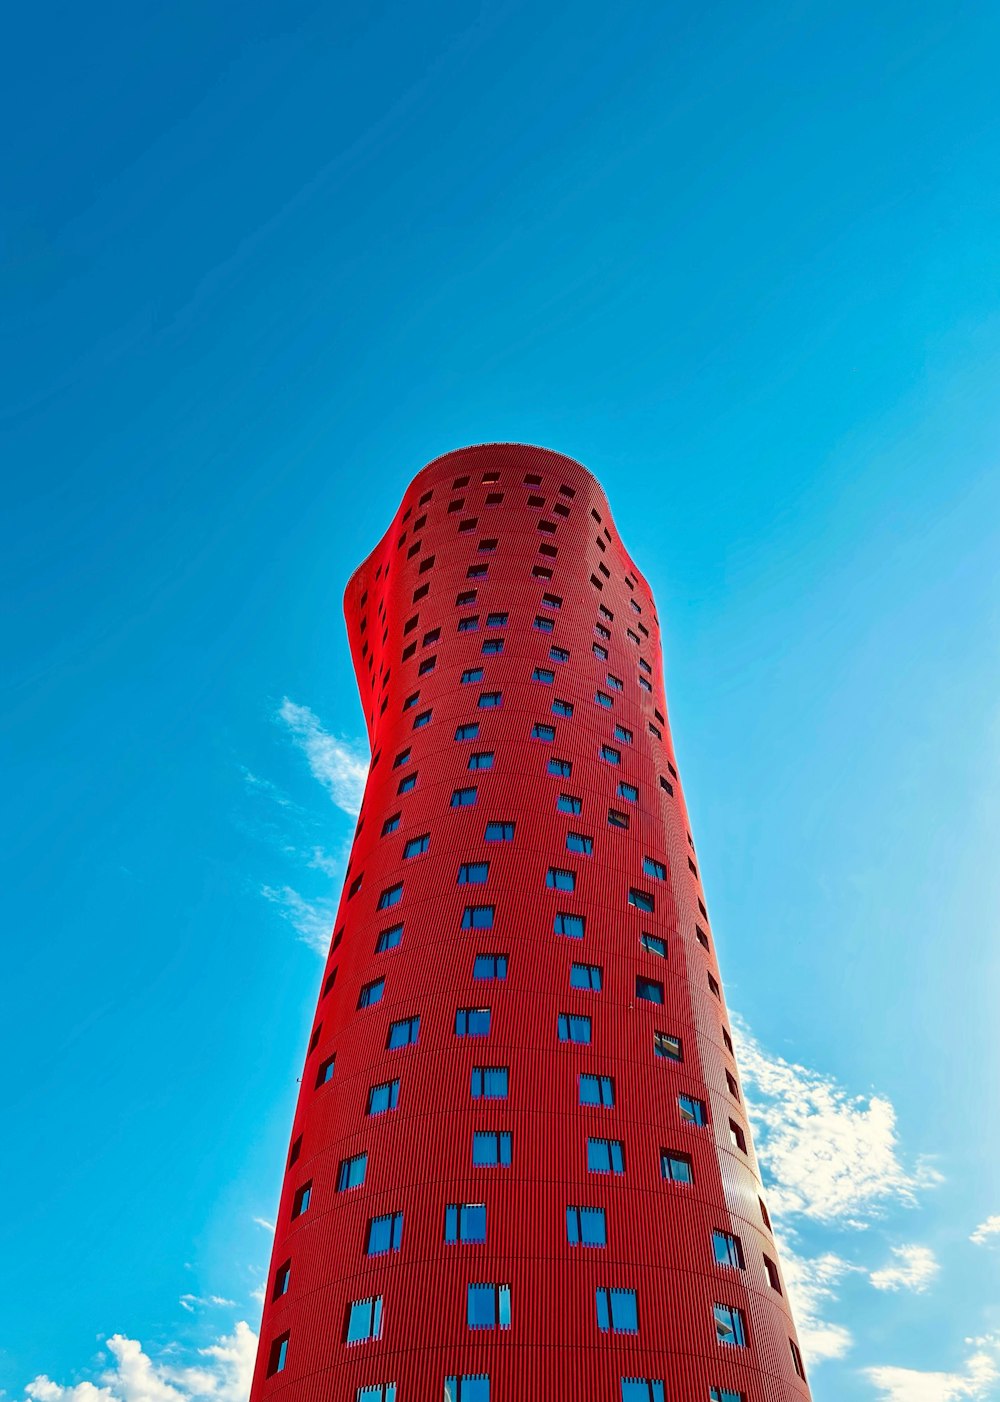 a tall red building with windows on the side of it